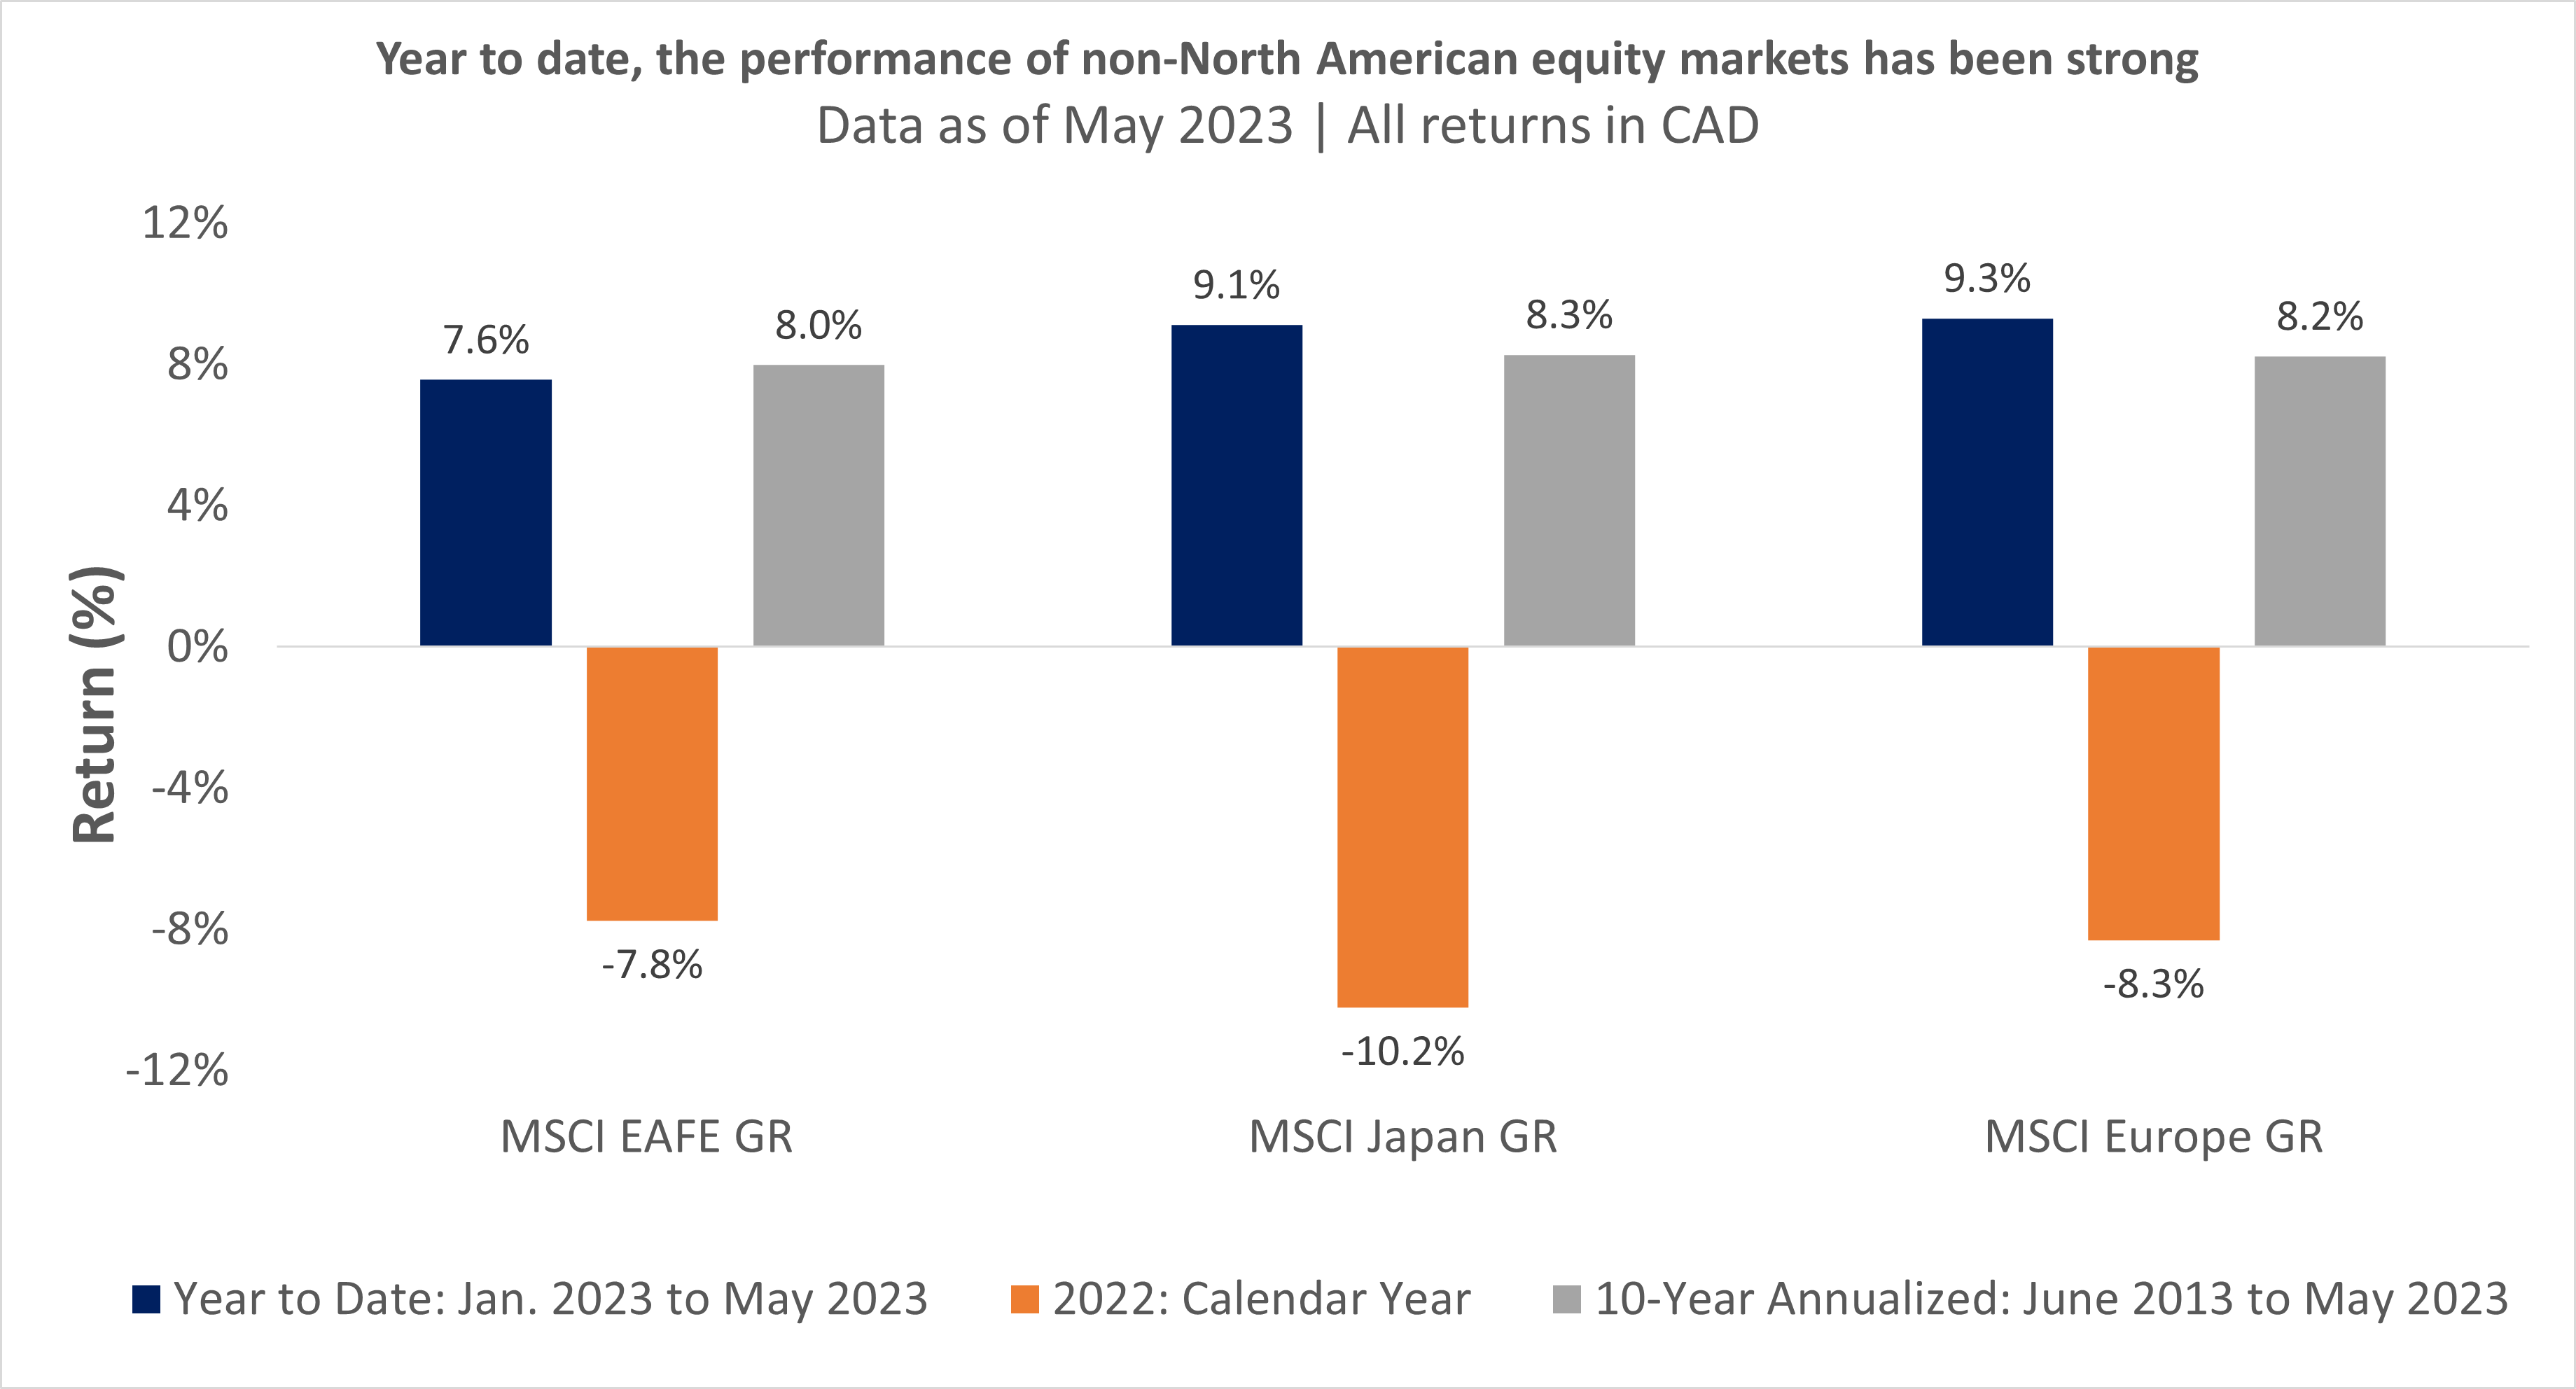 Performance of non-North American equity markets has been strong